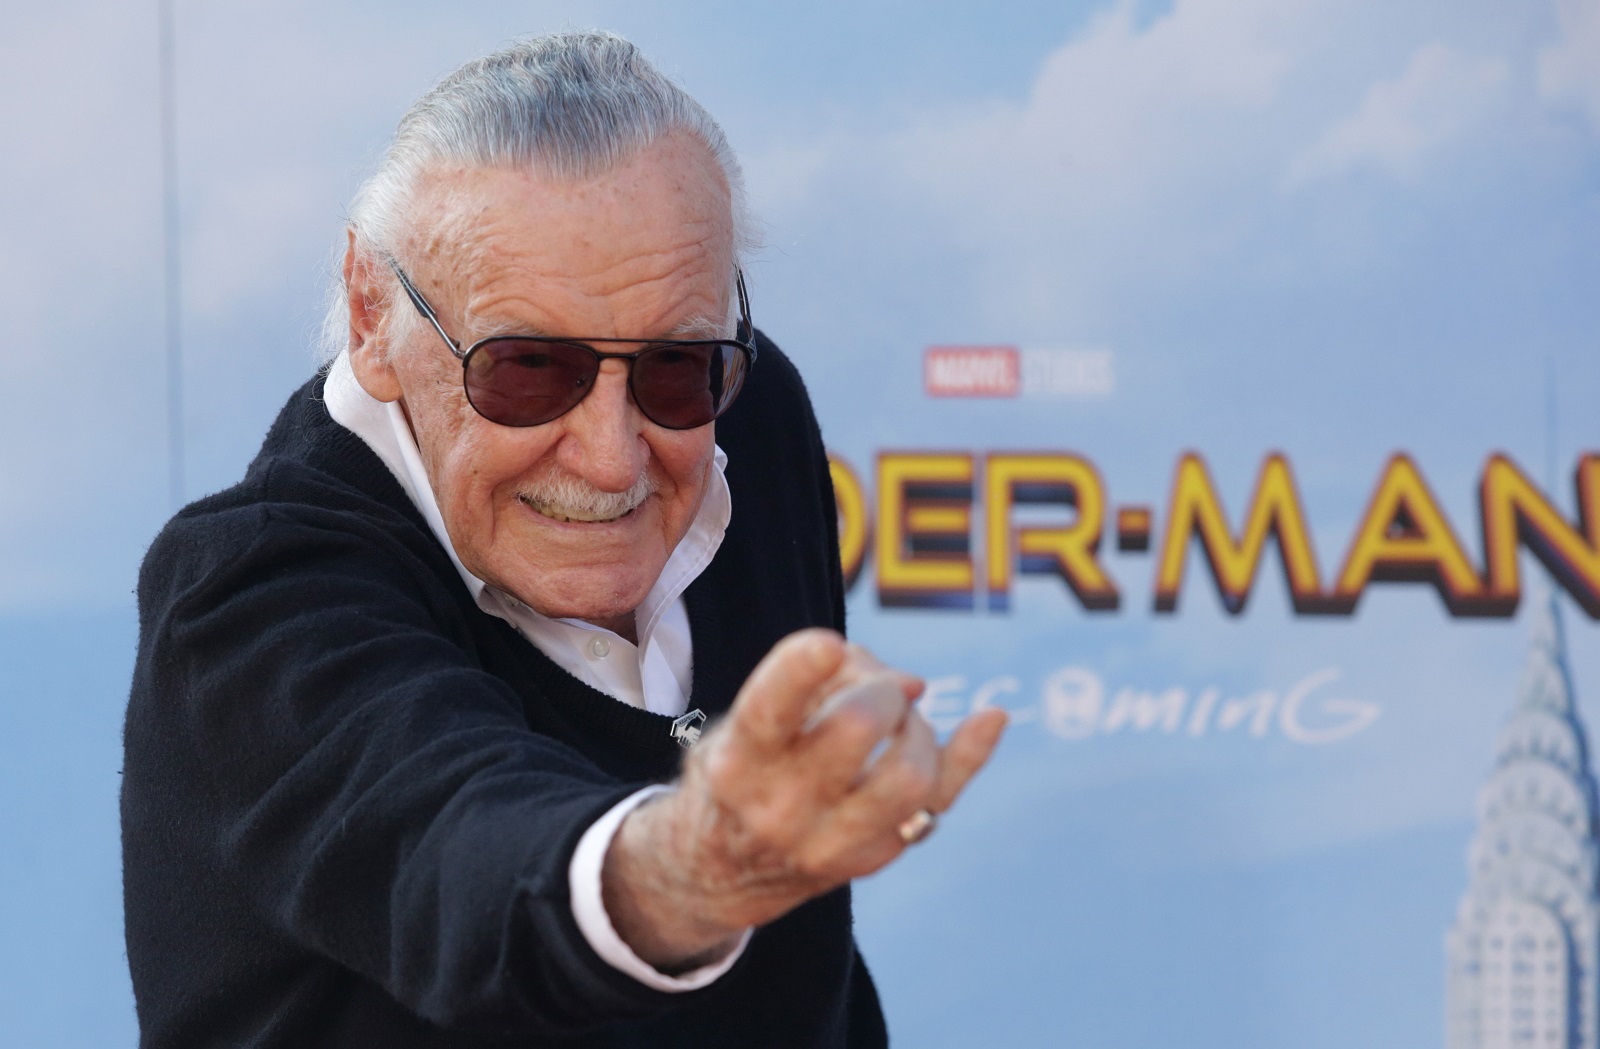 Stan Lee’s ‘Avengers: Endgame’ cameo has been confirmed to be his last ...